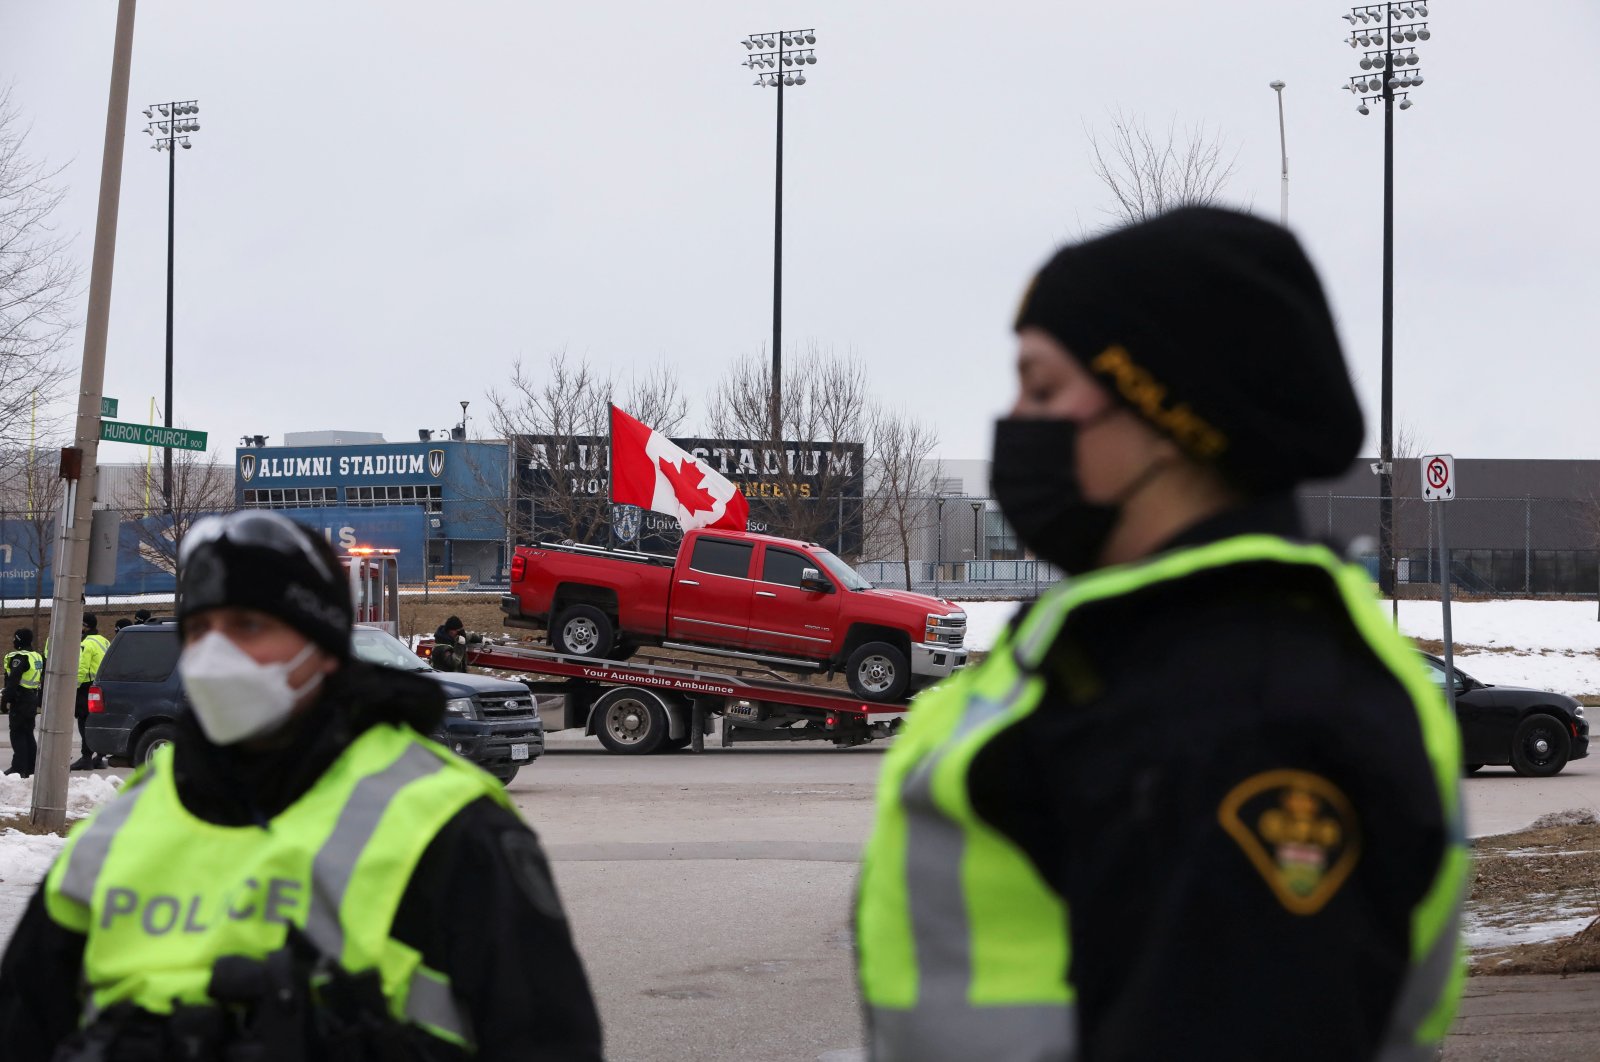 Police officers move along a road leading to the Ambassador Bridge, which connects Detroit and Windsor, after clearing demonstrators, during a protest against COVID-19 vaccine mandates, in Windsor, Ontario, Canada, Feb. 13, 2022. (Reuters Photo)